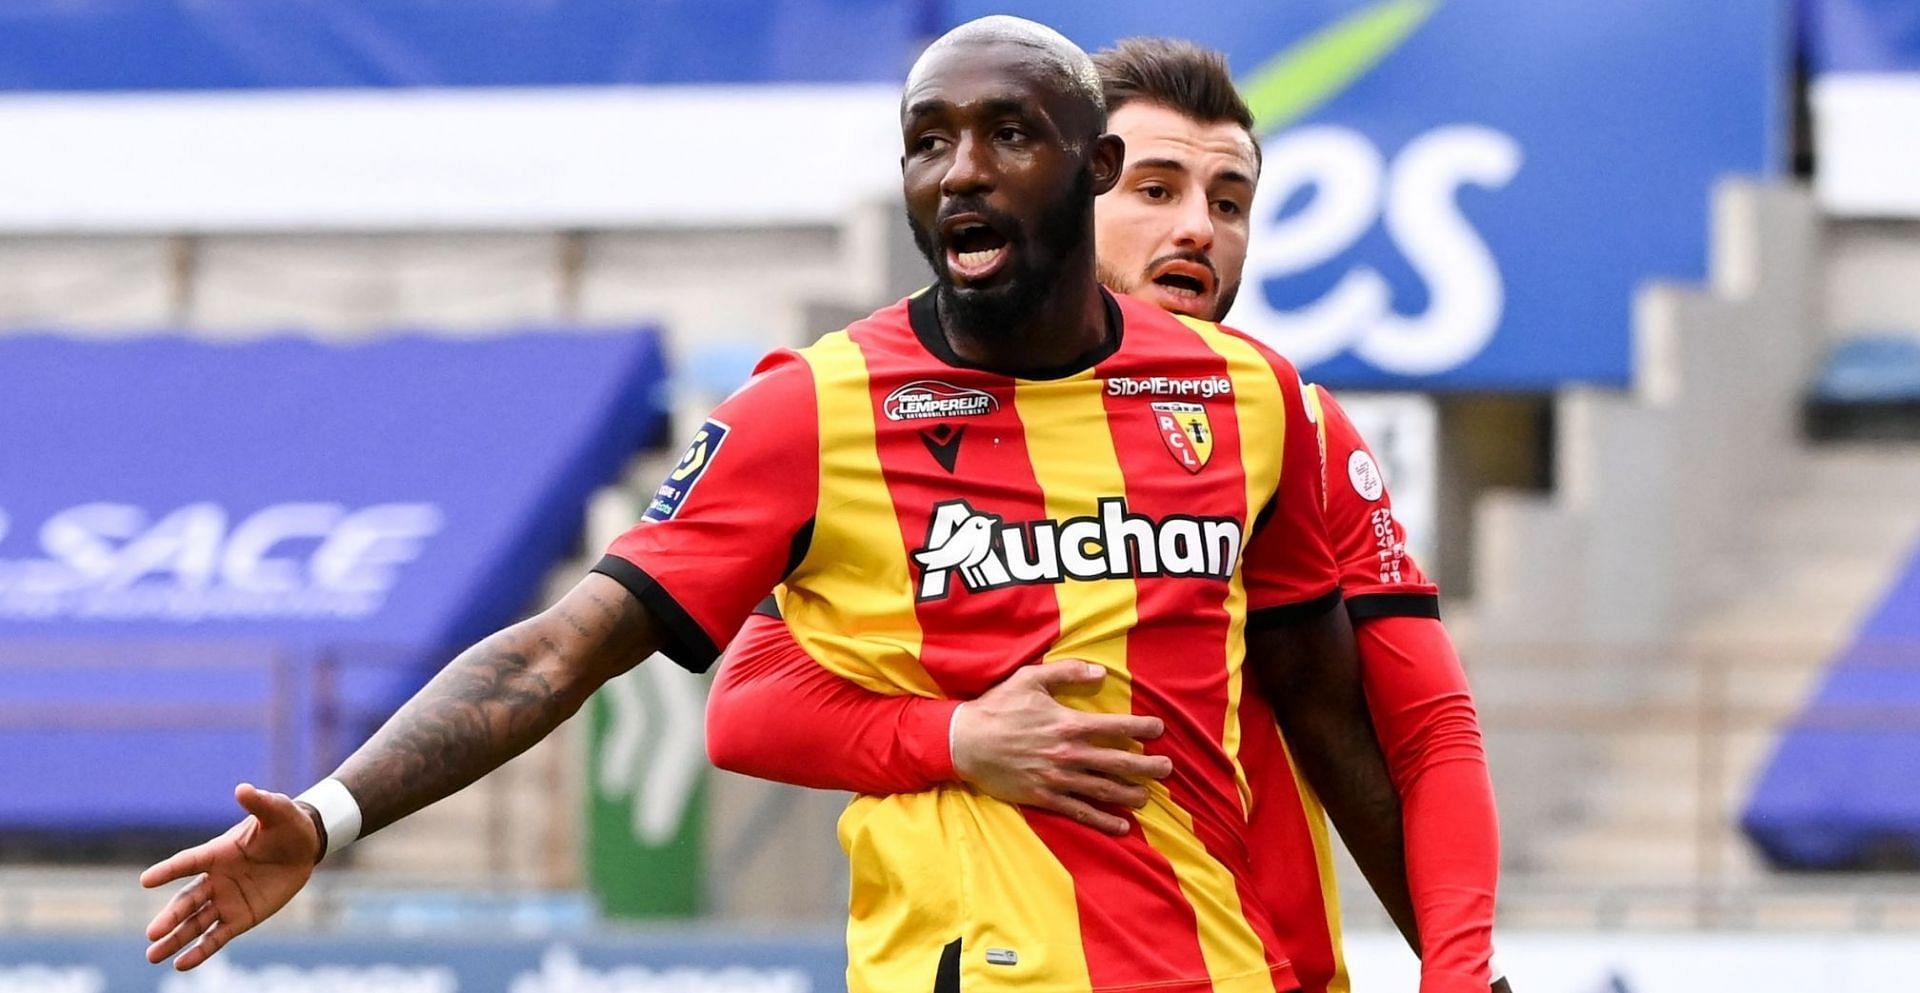 Can Lens pick up a key win over Troyes this weekend?